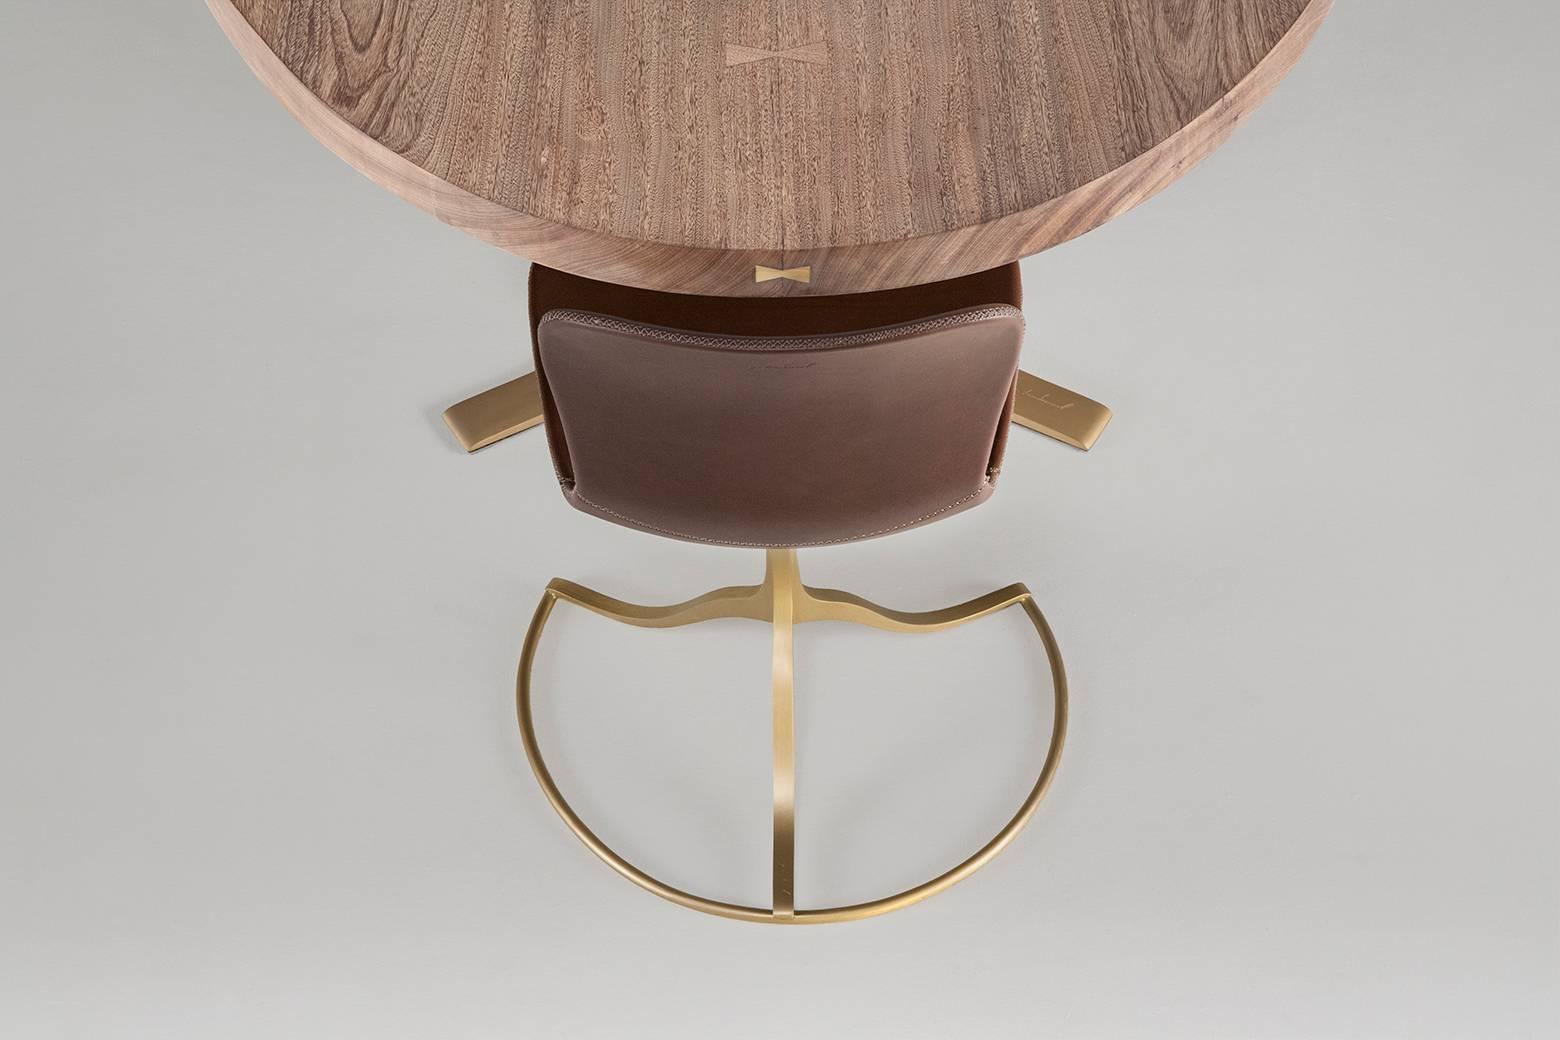 Bespoke Sand Cast Brass Chair in Vieux Rose Leather, by P. Tendercool For Sale 1